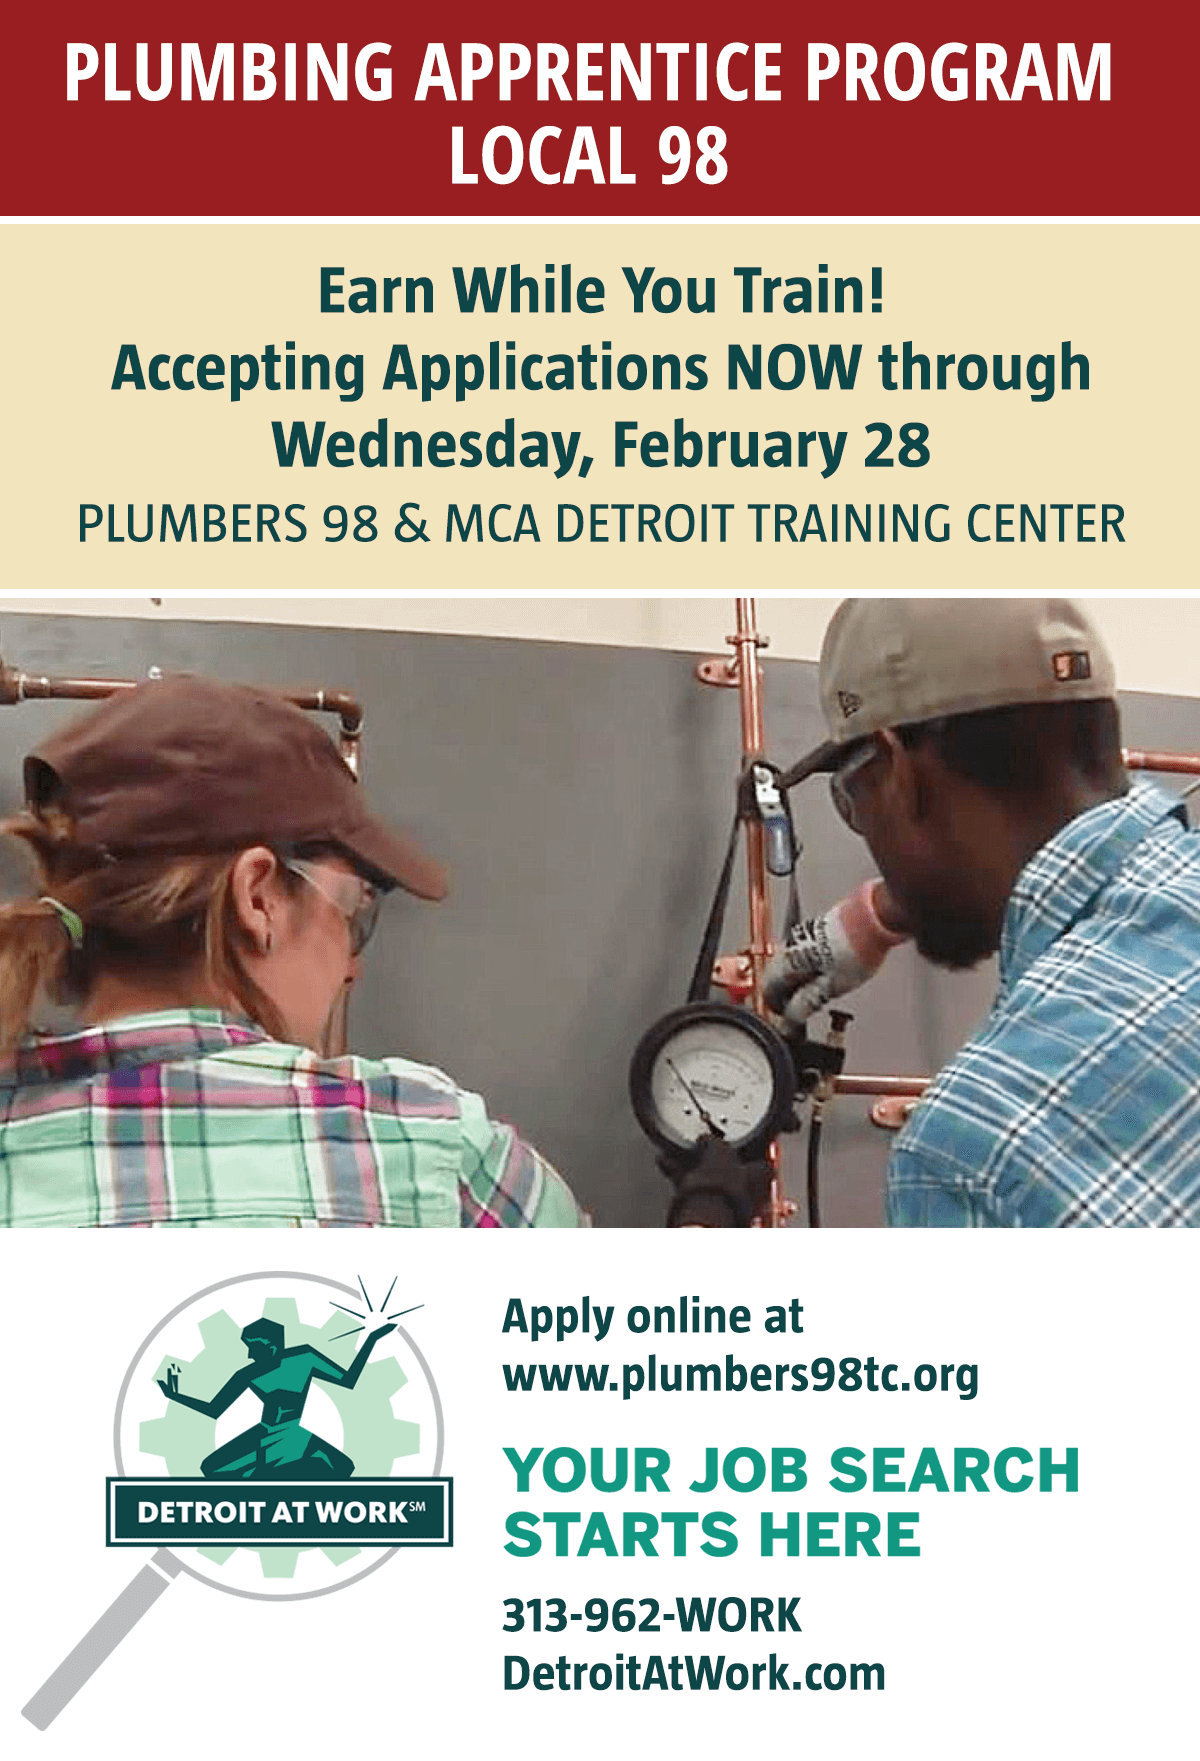 plumbers-local-98-accepting-apprentice-program-applications-detroit-employment-solutions